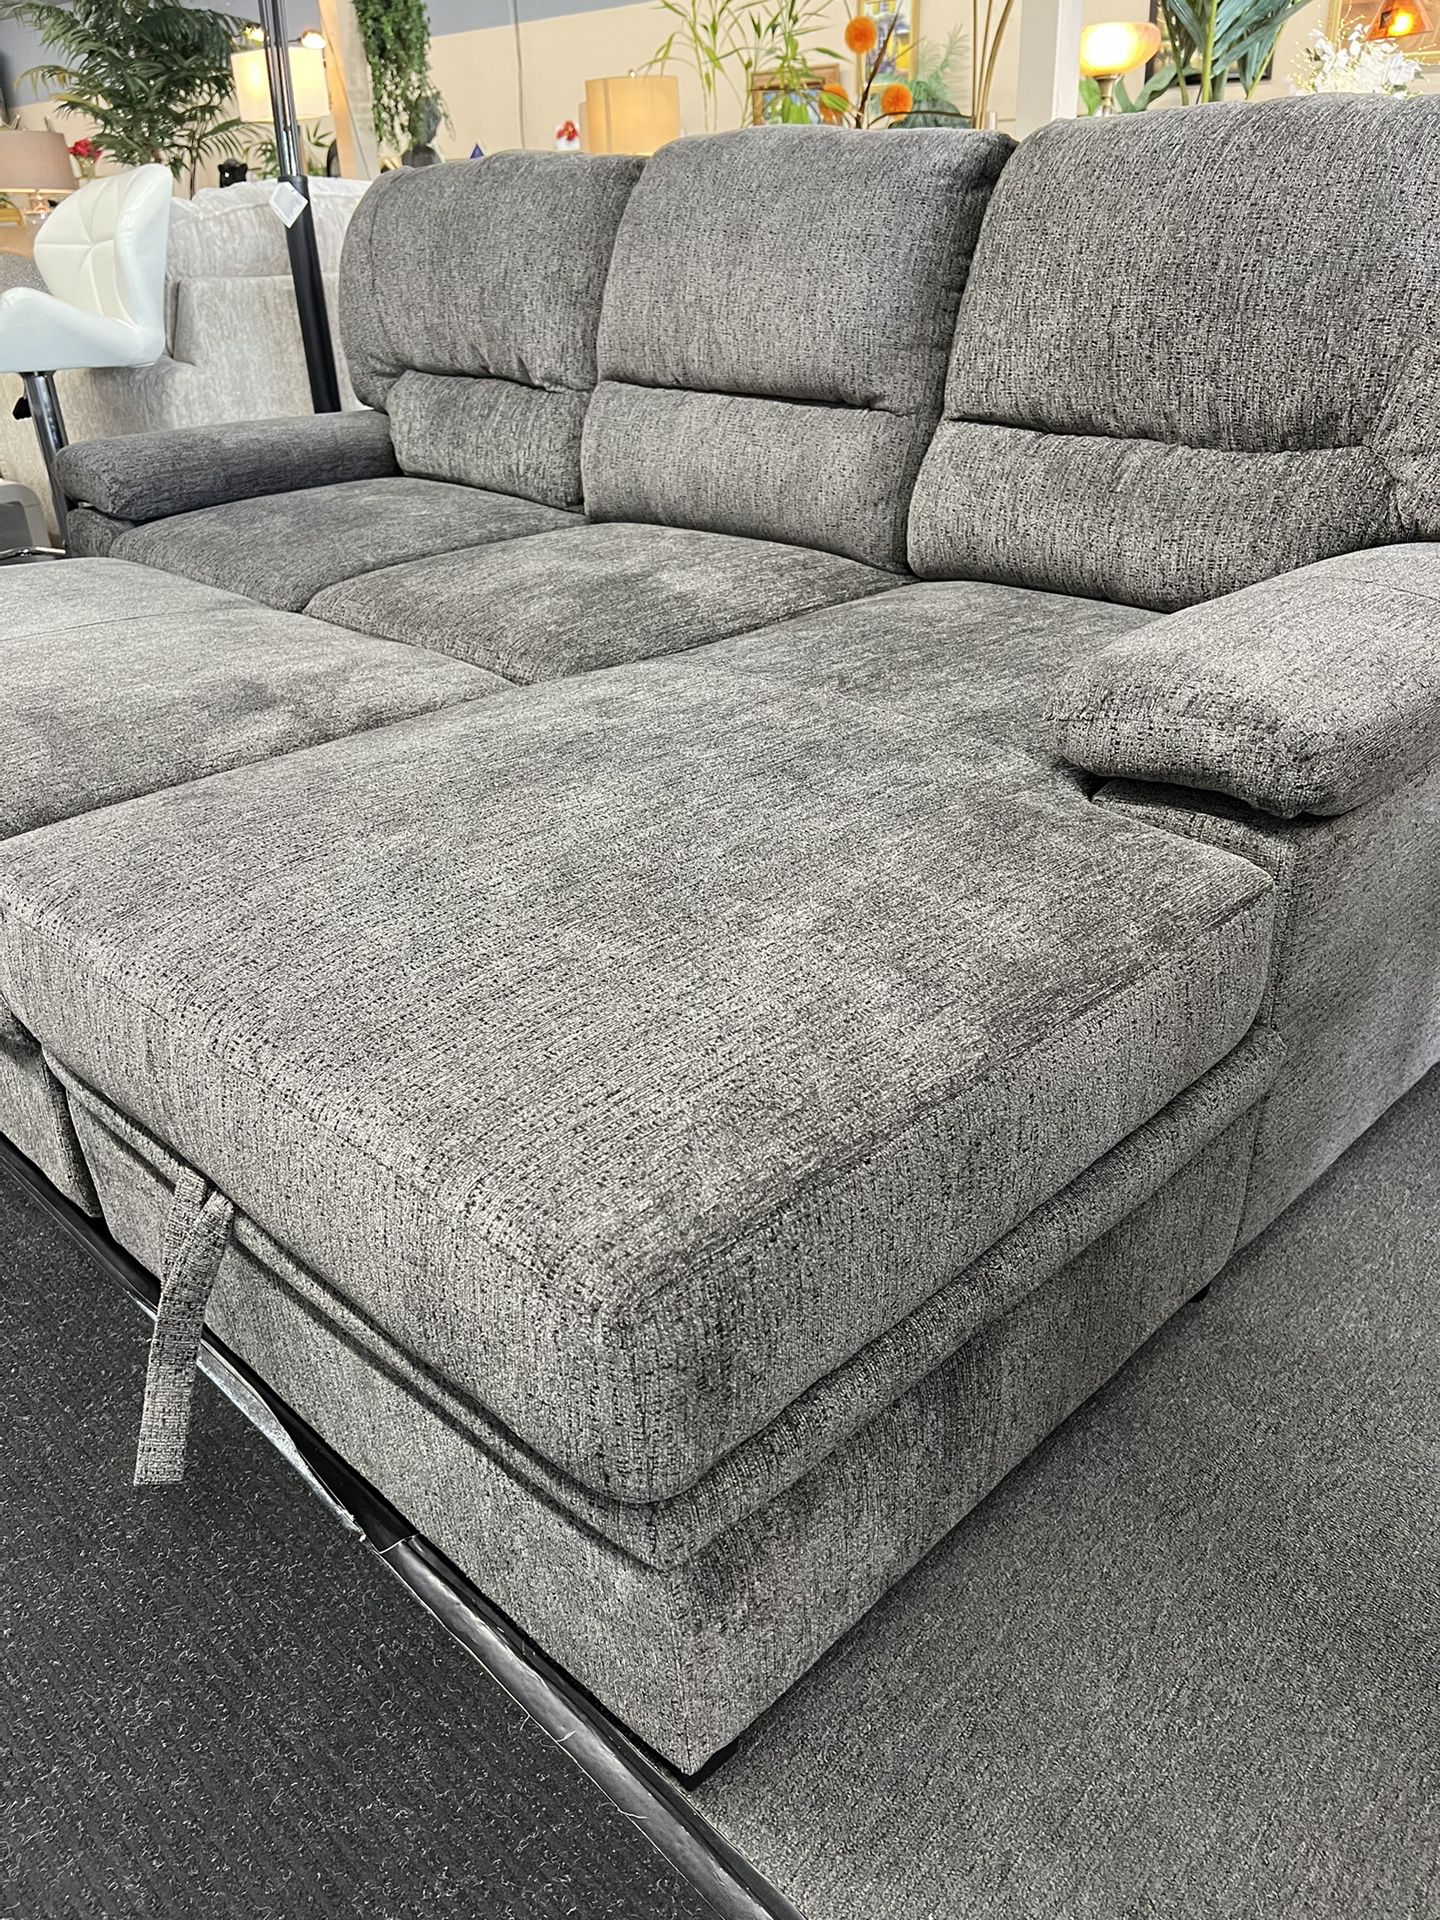 Gray Sectional With Pull Out Bed & Storage Chaise